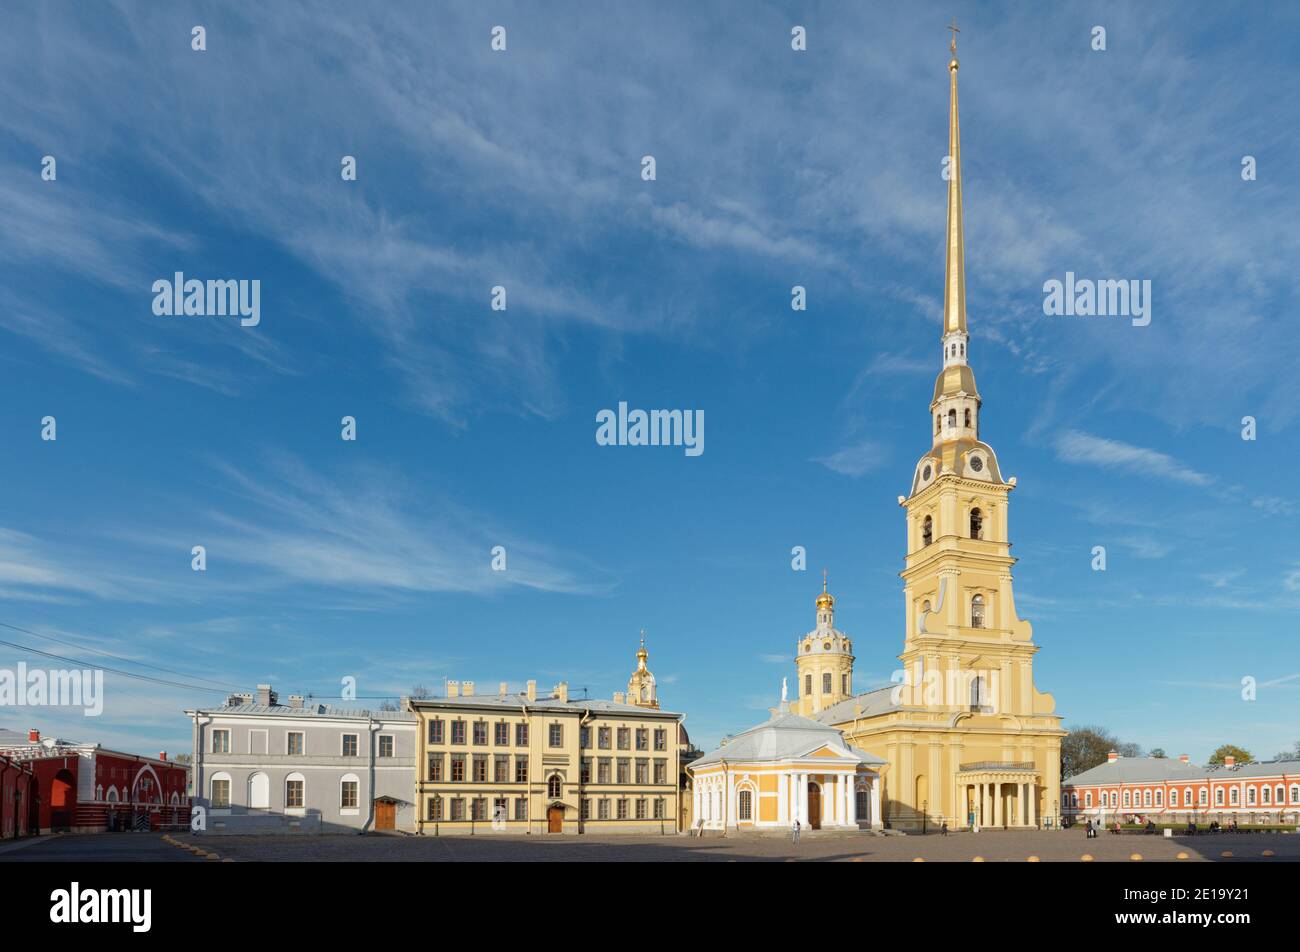 St. Peter and Paul Cathedral on Zayachy island in St. Petersburg, Russia. Built in 1712-1733, it is the first and oldest landmark in St. Petersburg Stock Photo